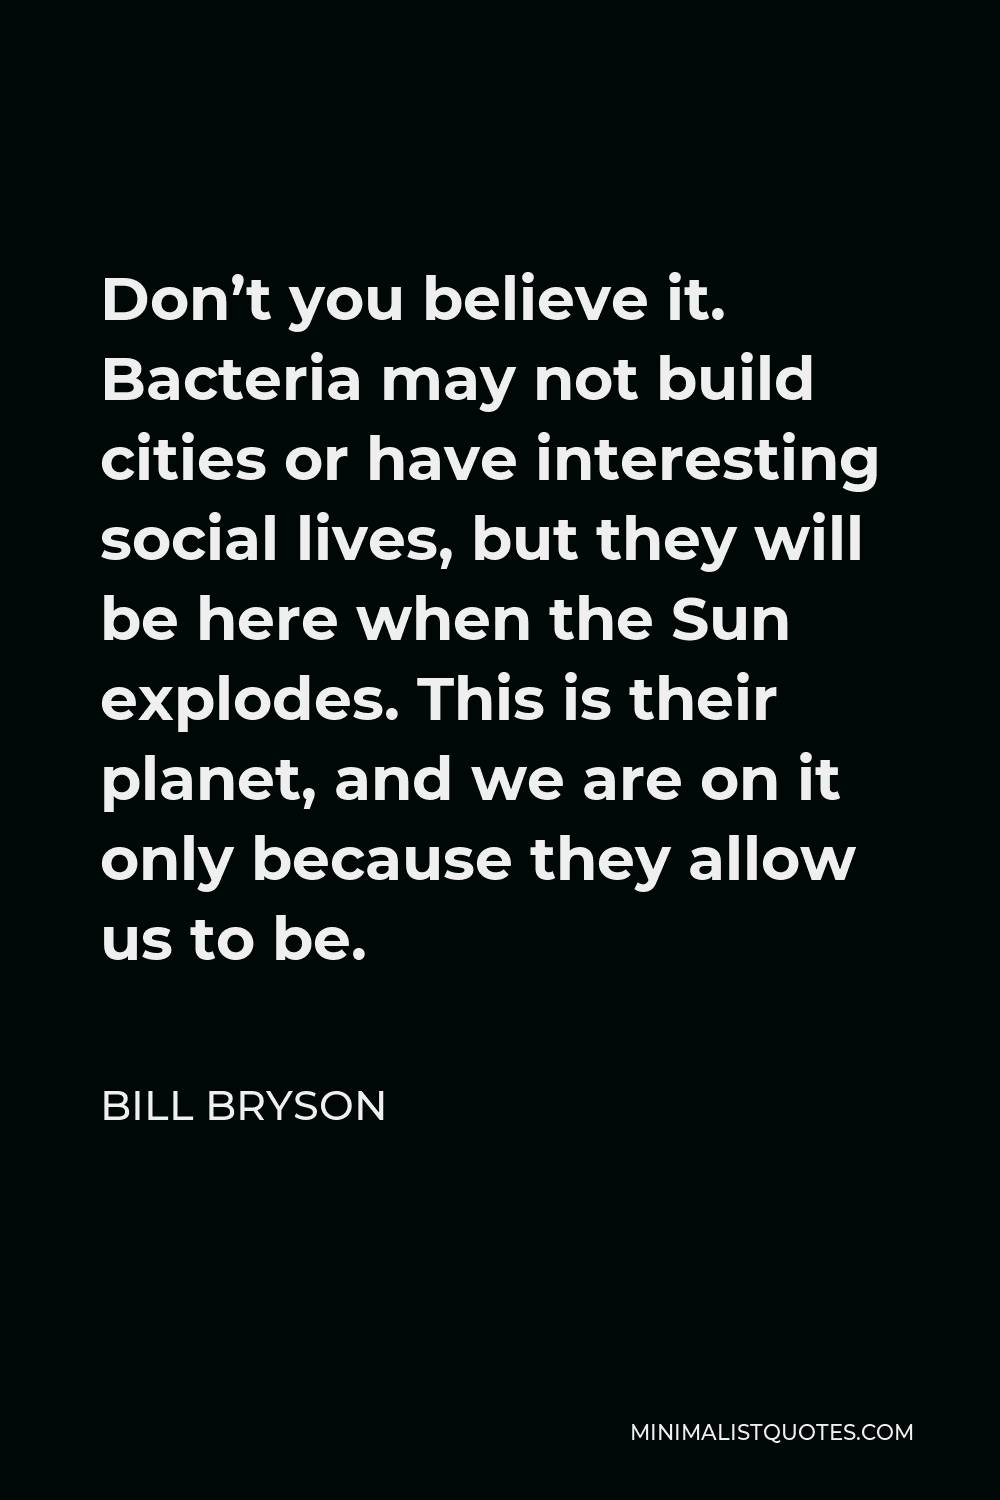 Bill Bryson Quote - Don’t you believe it. Bacteria may not build cities or have interesting social lives, but they will be here when the Sun explodes. This is their planet, and we are on it only because they allow us to be.